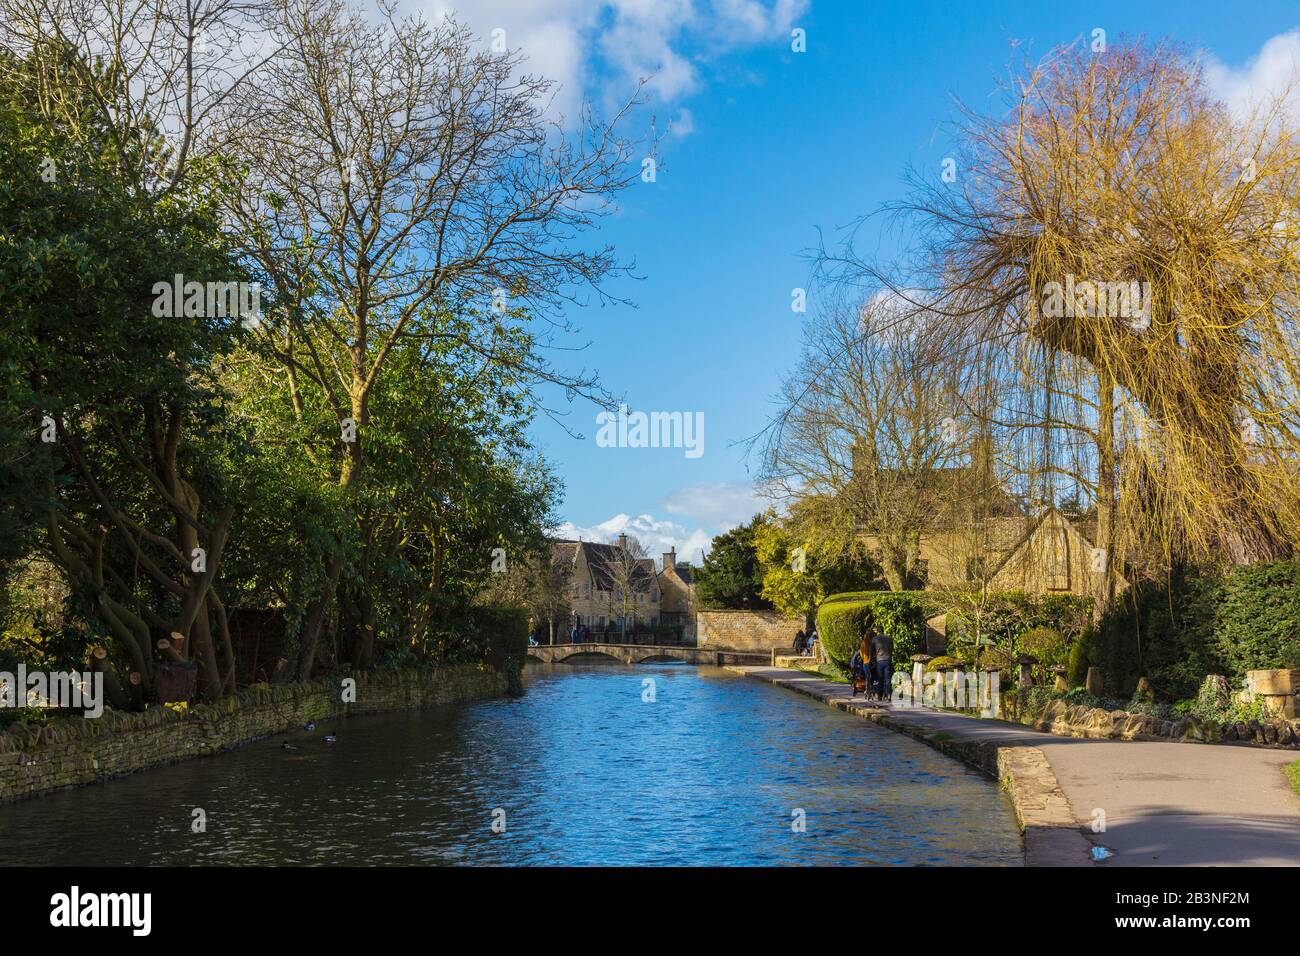 The River Windrush Flowing Through the Centre of Bourton-on-the-Water a Village in the Cotswolds AONB on a Bright Spring Morning Stock Photo